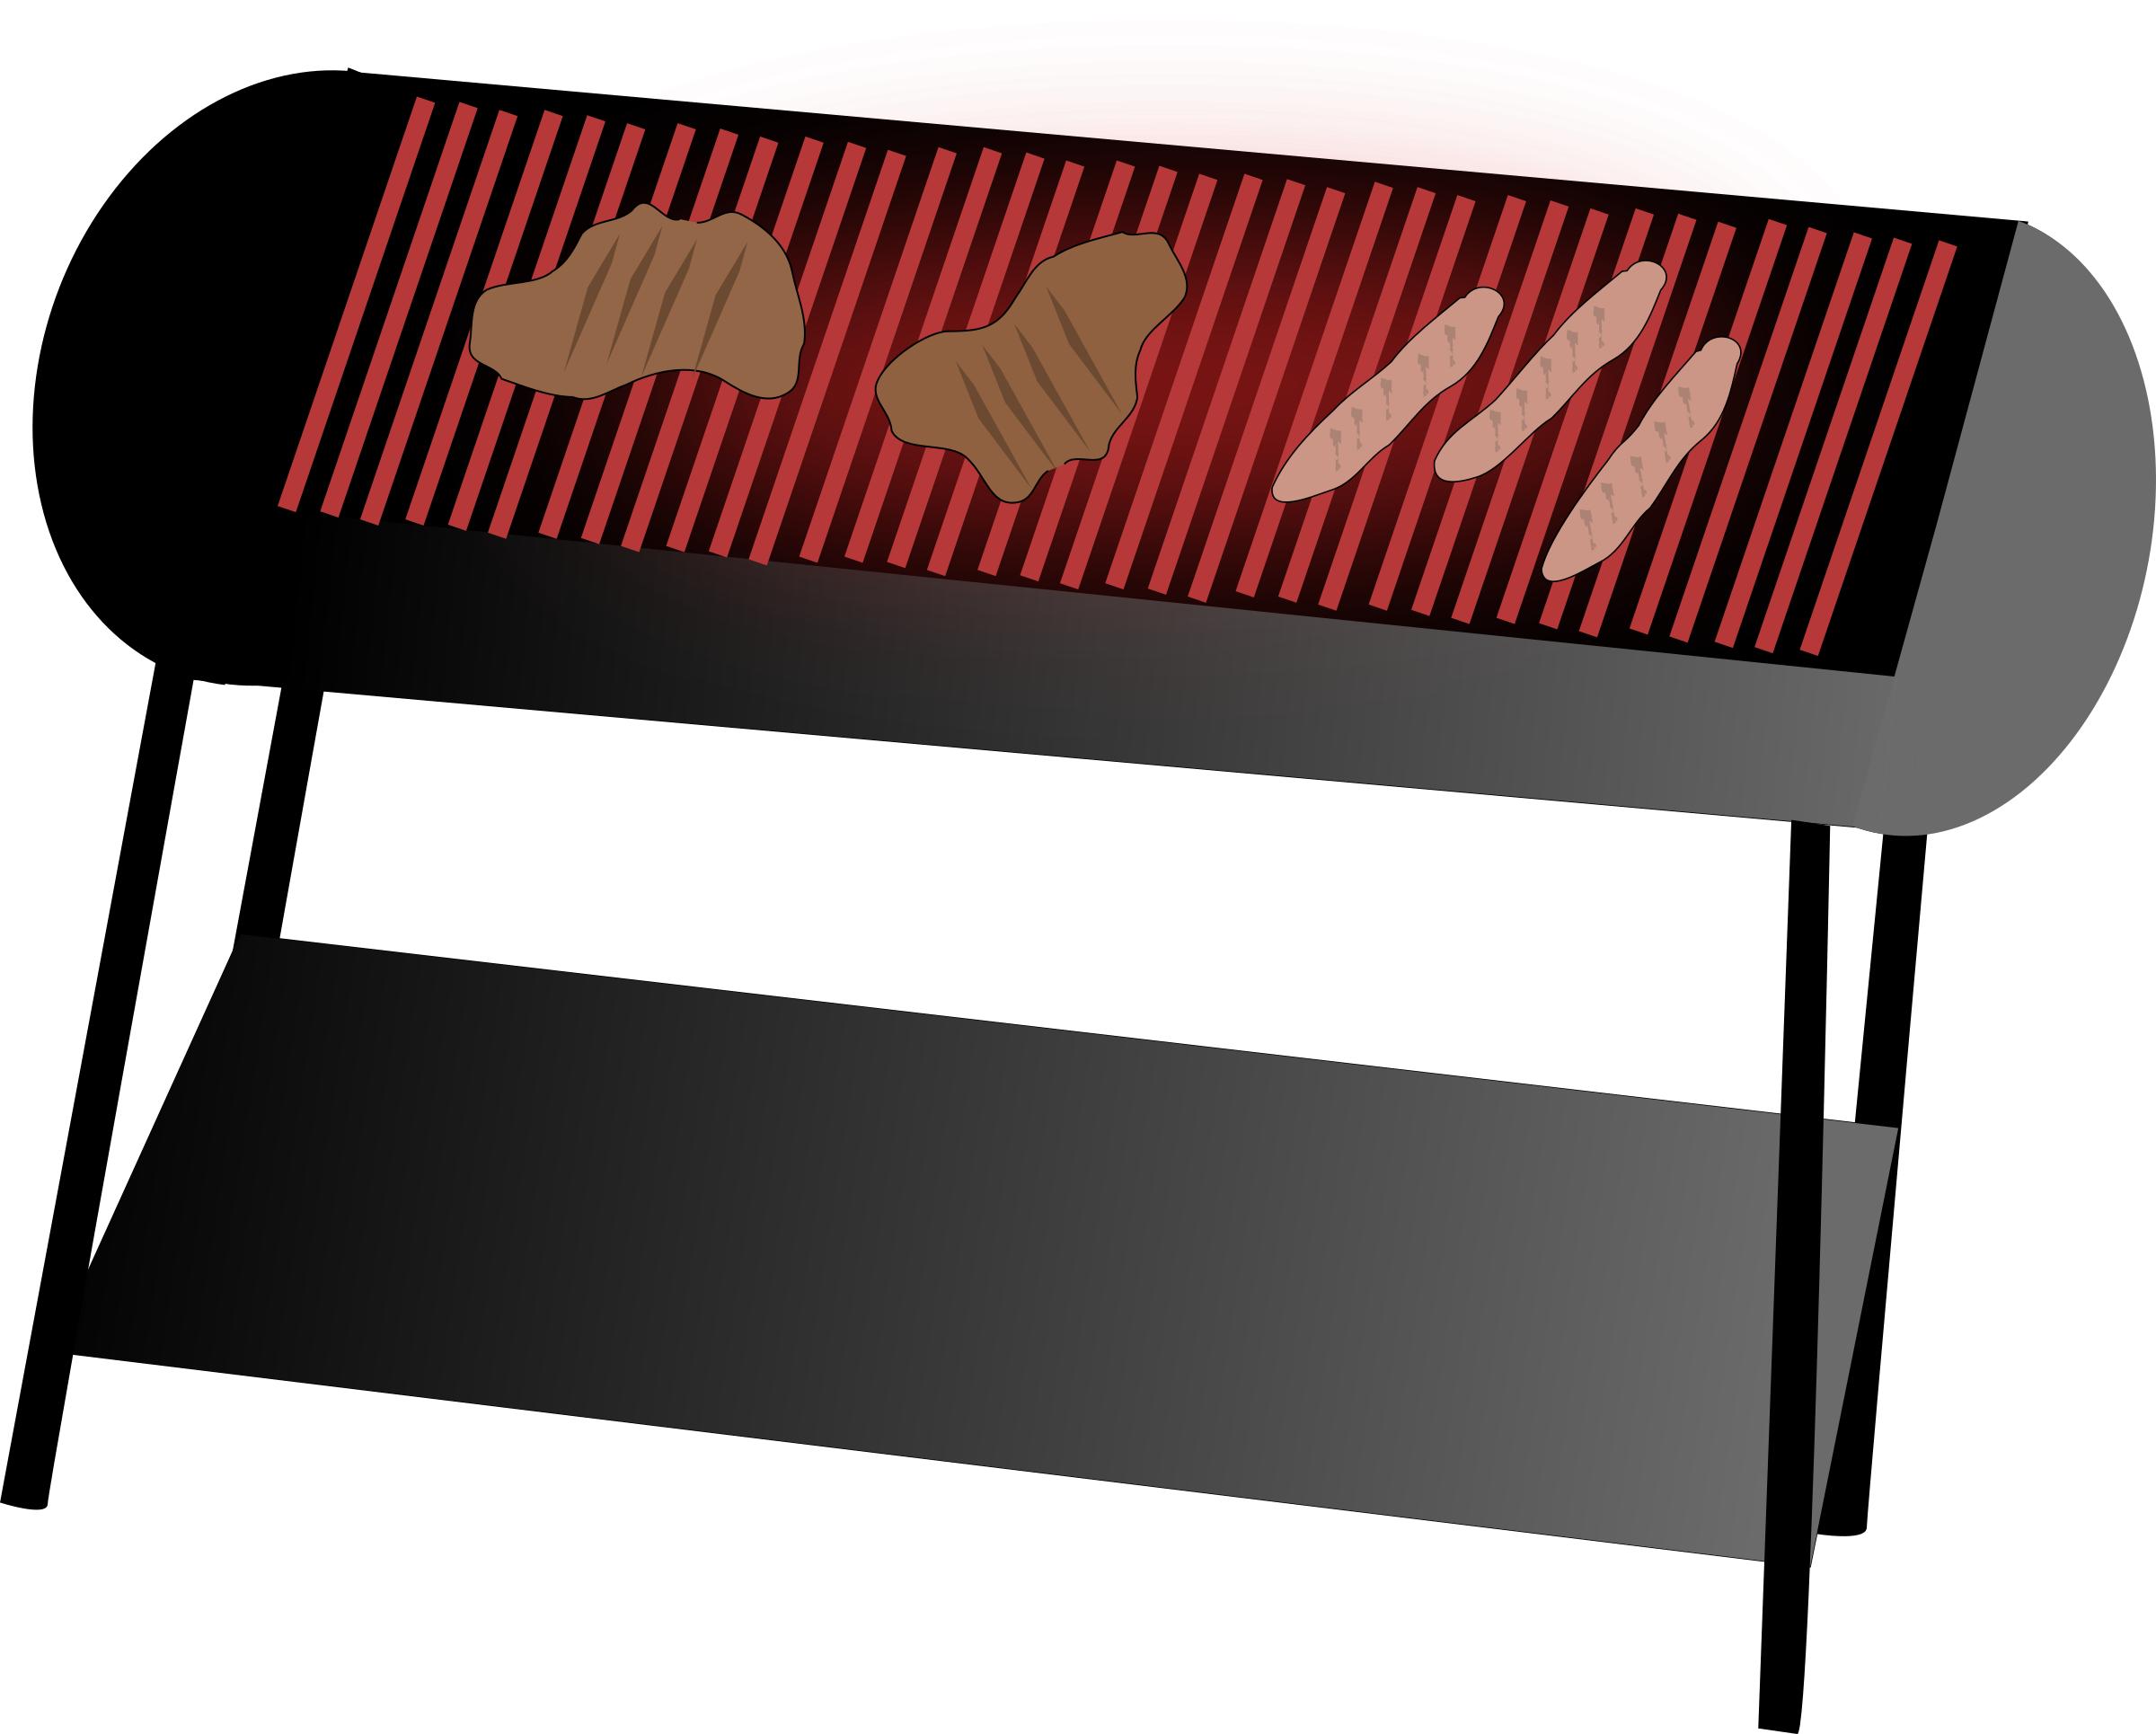 Simple BBQ png